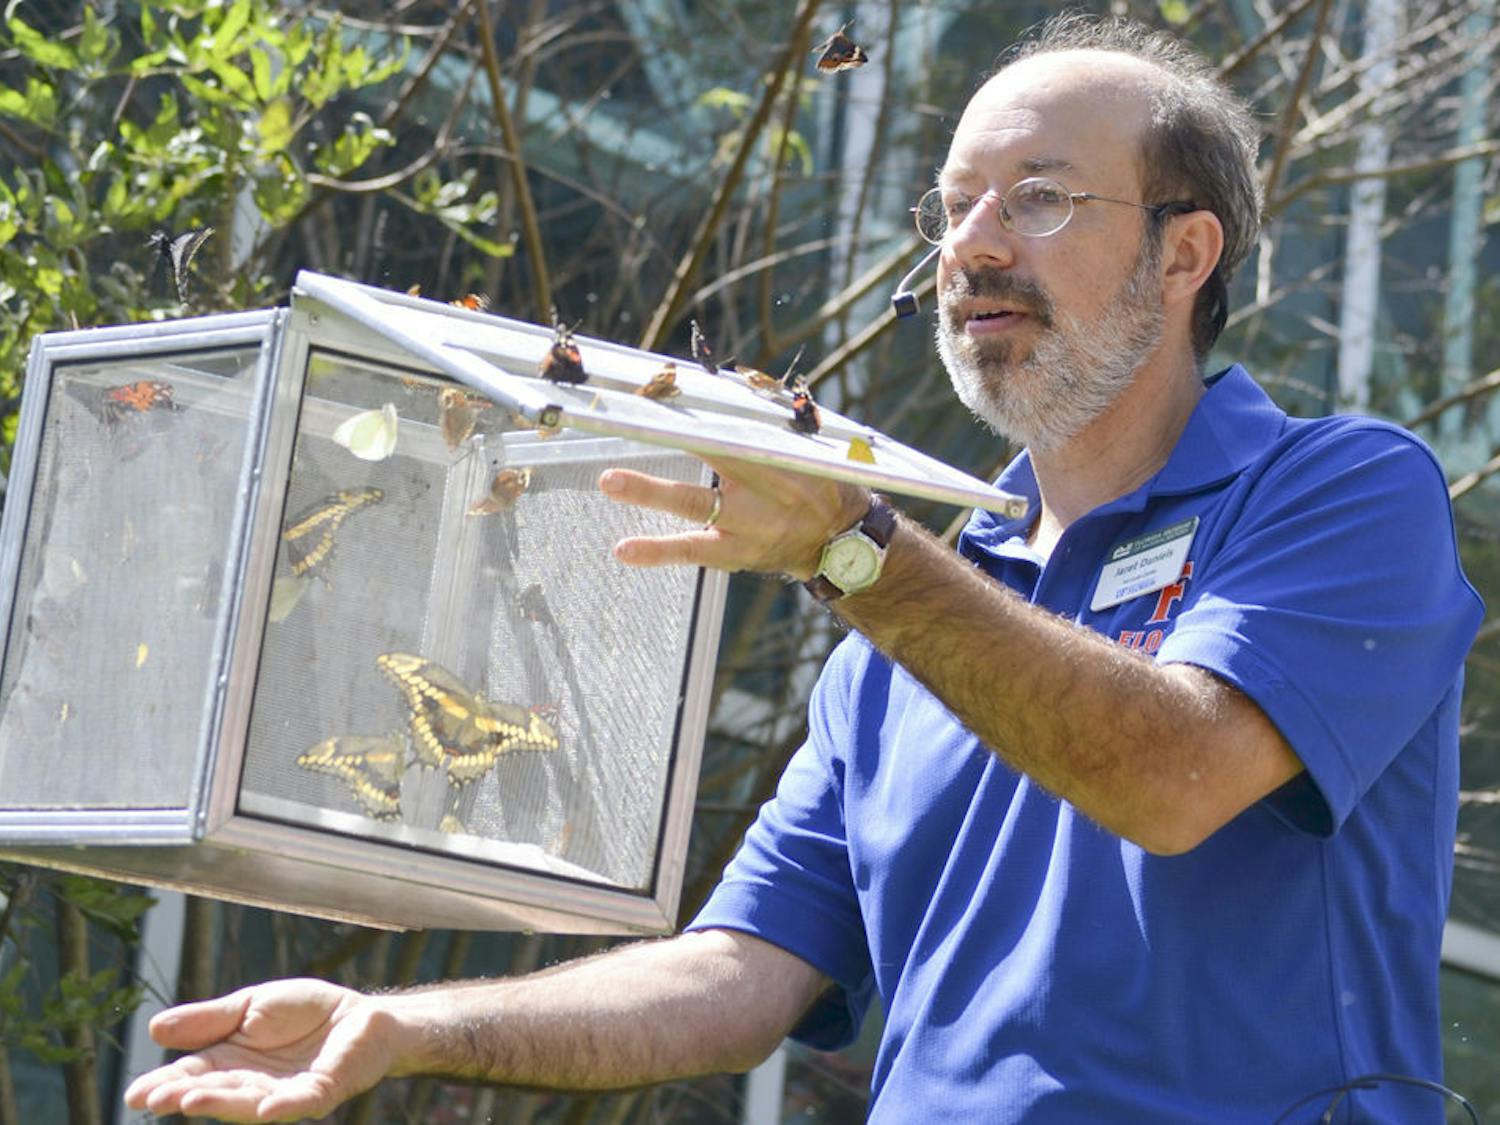 Jaret C. Daniels, a curator at the McGuire Center for Lepidoptera and Biodiversity, released native Florida butterflies during Saturday’s ButterflyFest event at the Florida Museum of Natural History.